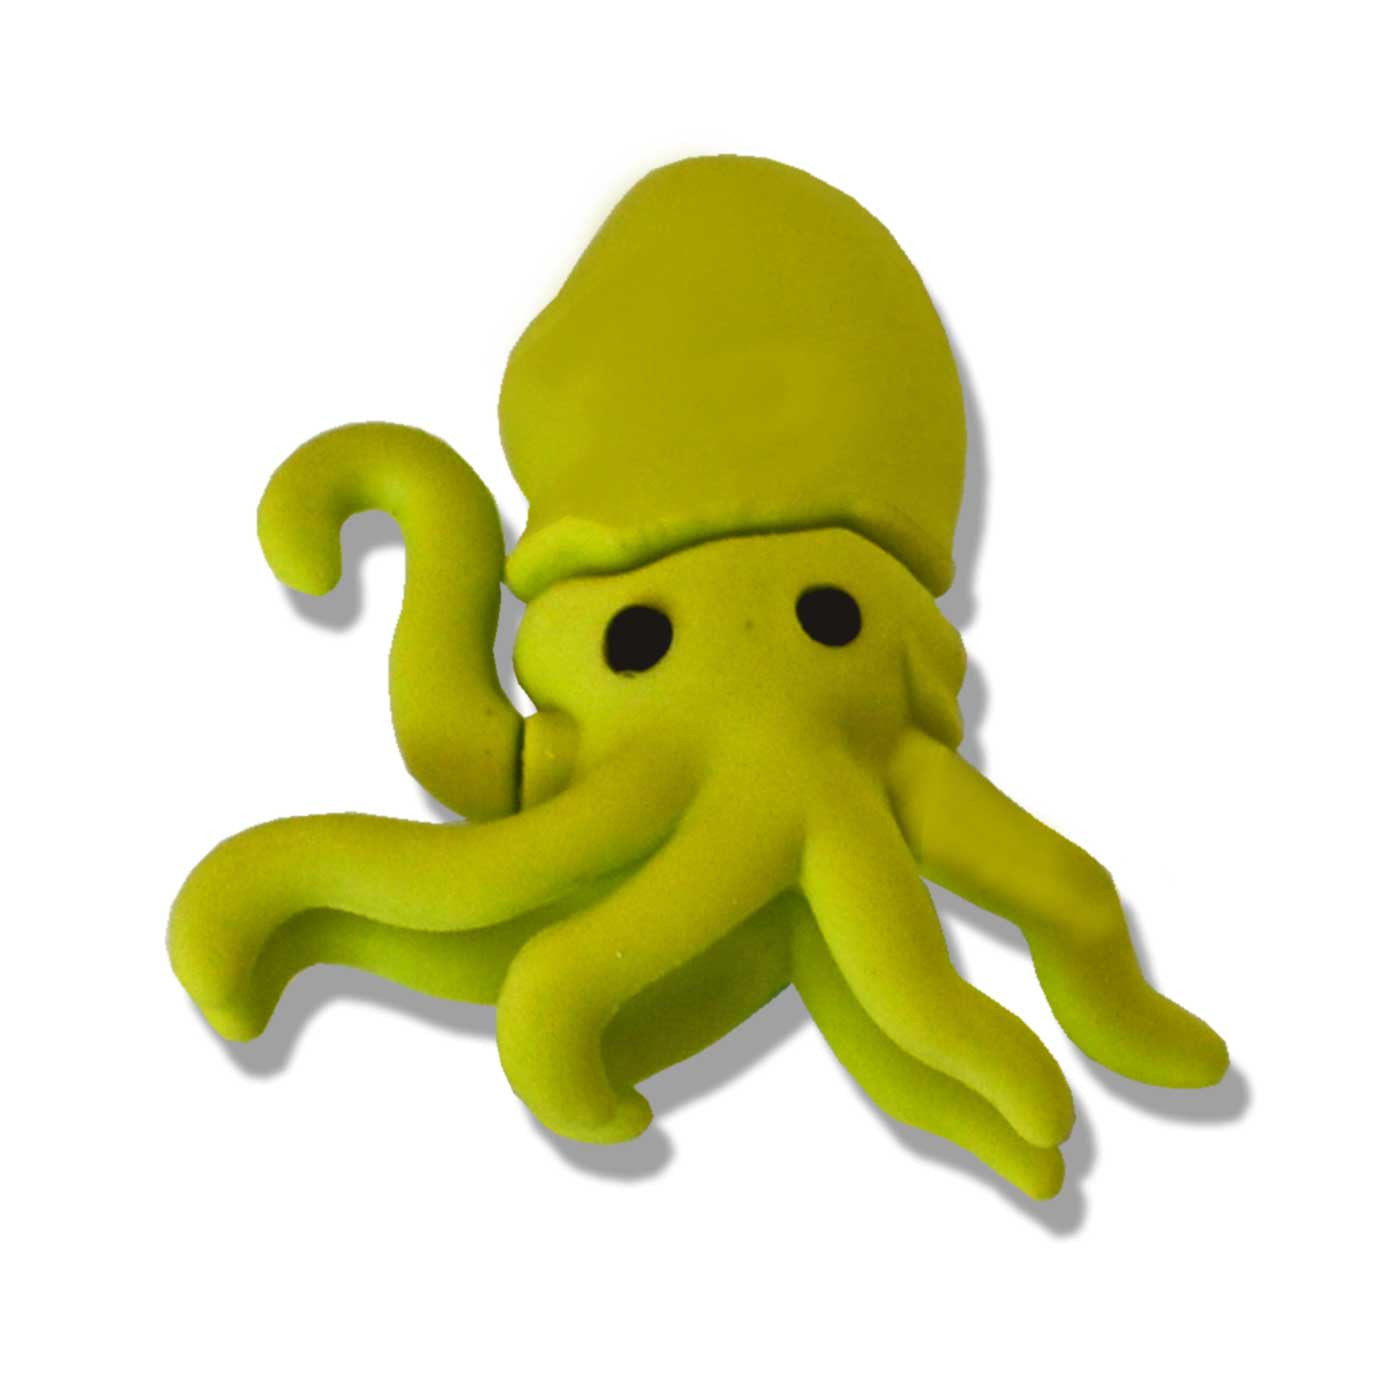 Octopus Shaped Pencil Eraser With Removable Head - School Depot NZ - 1